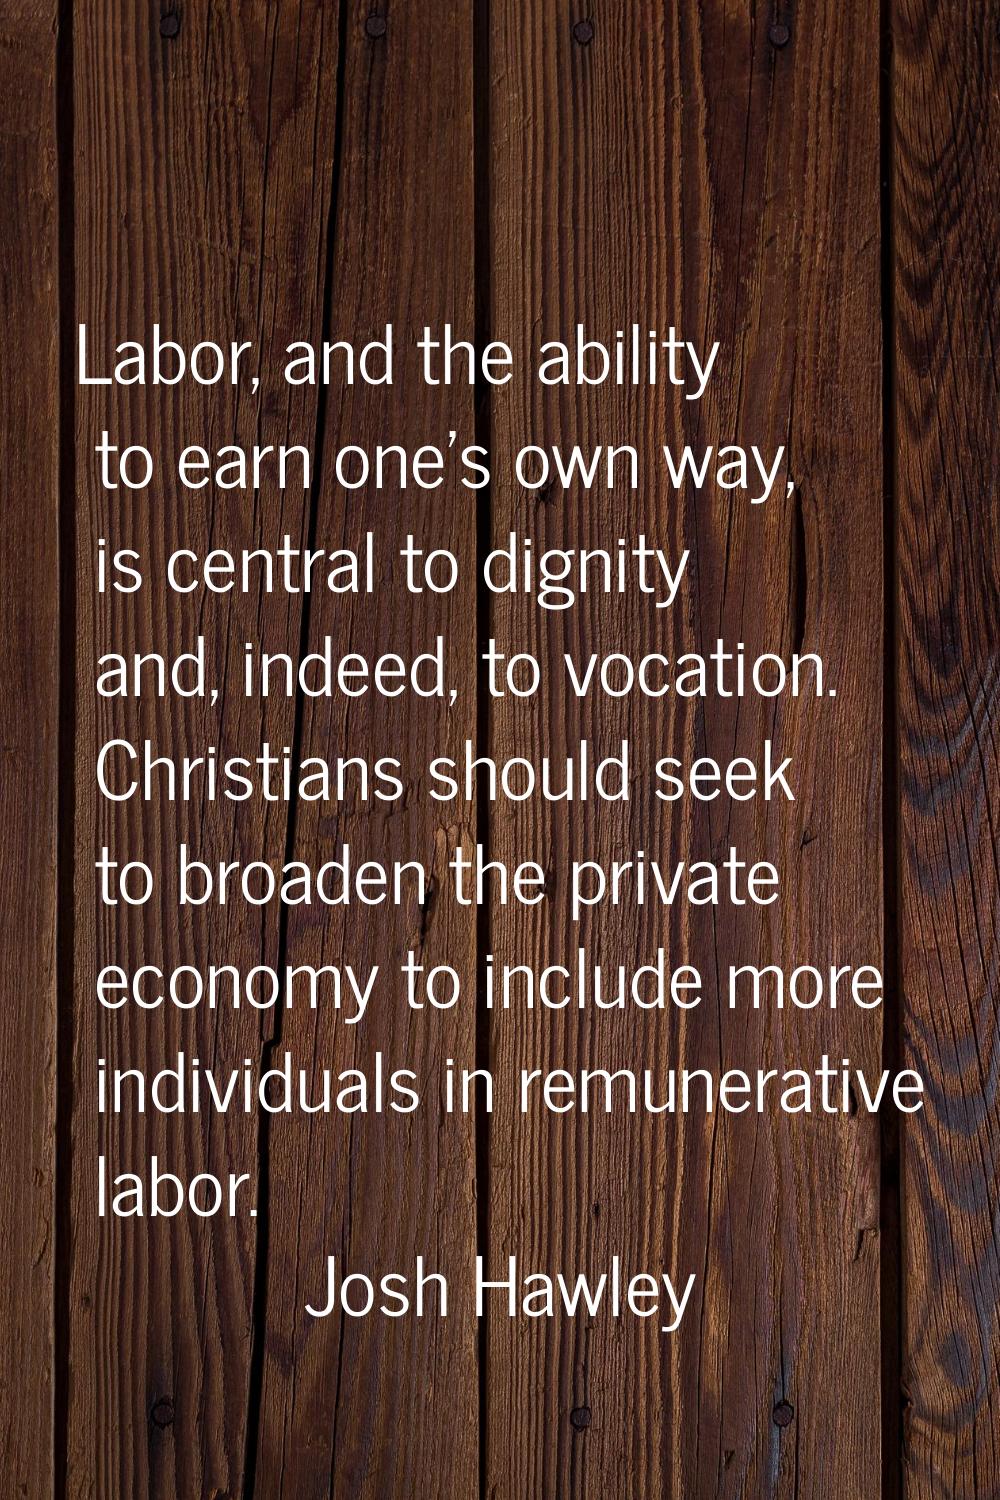 Labor, and the ability to earn one's own way, is central to dignity and, indeed, to vocation. Chris